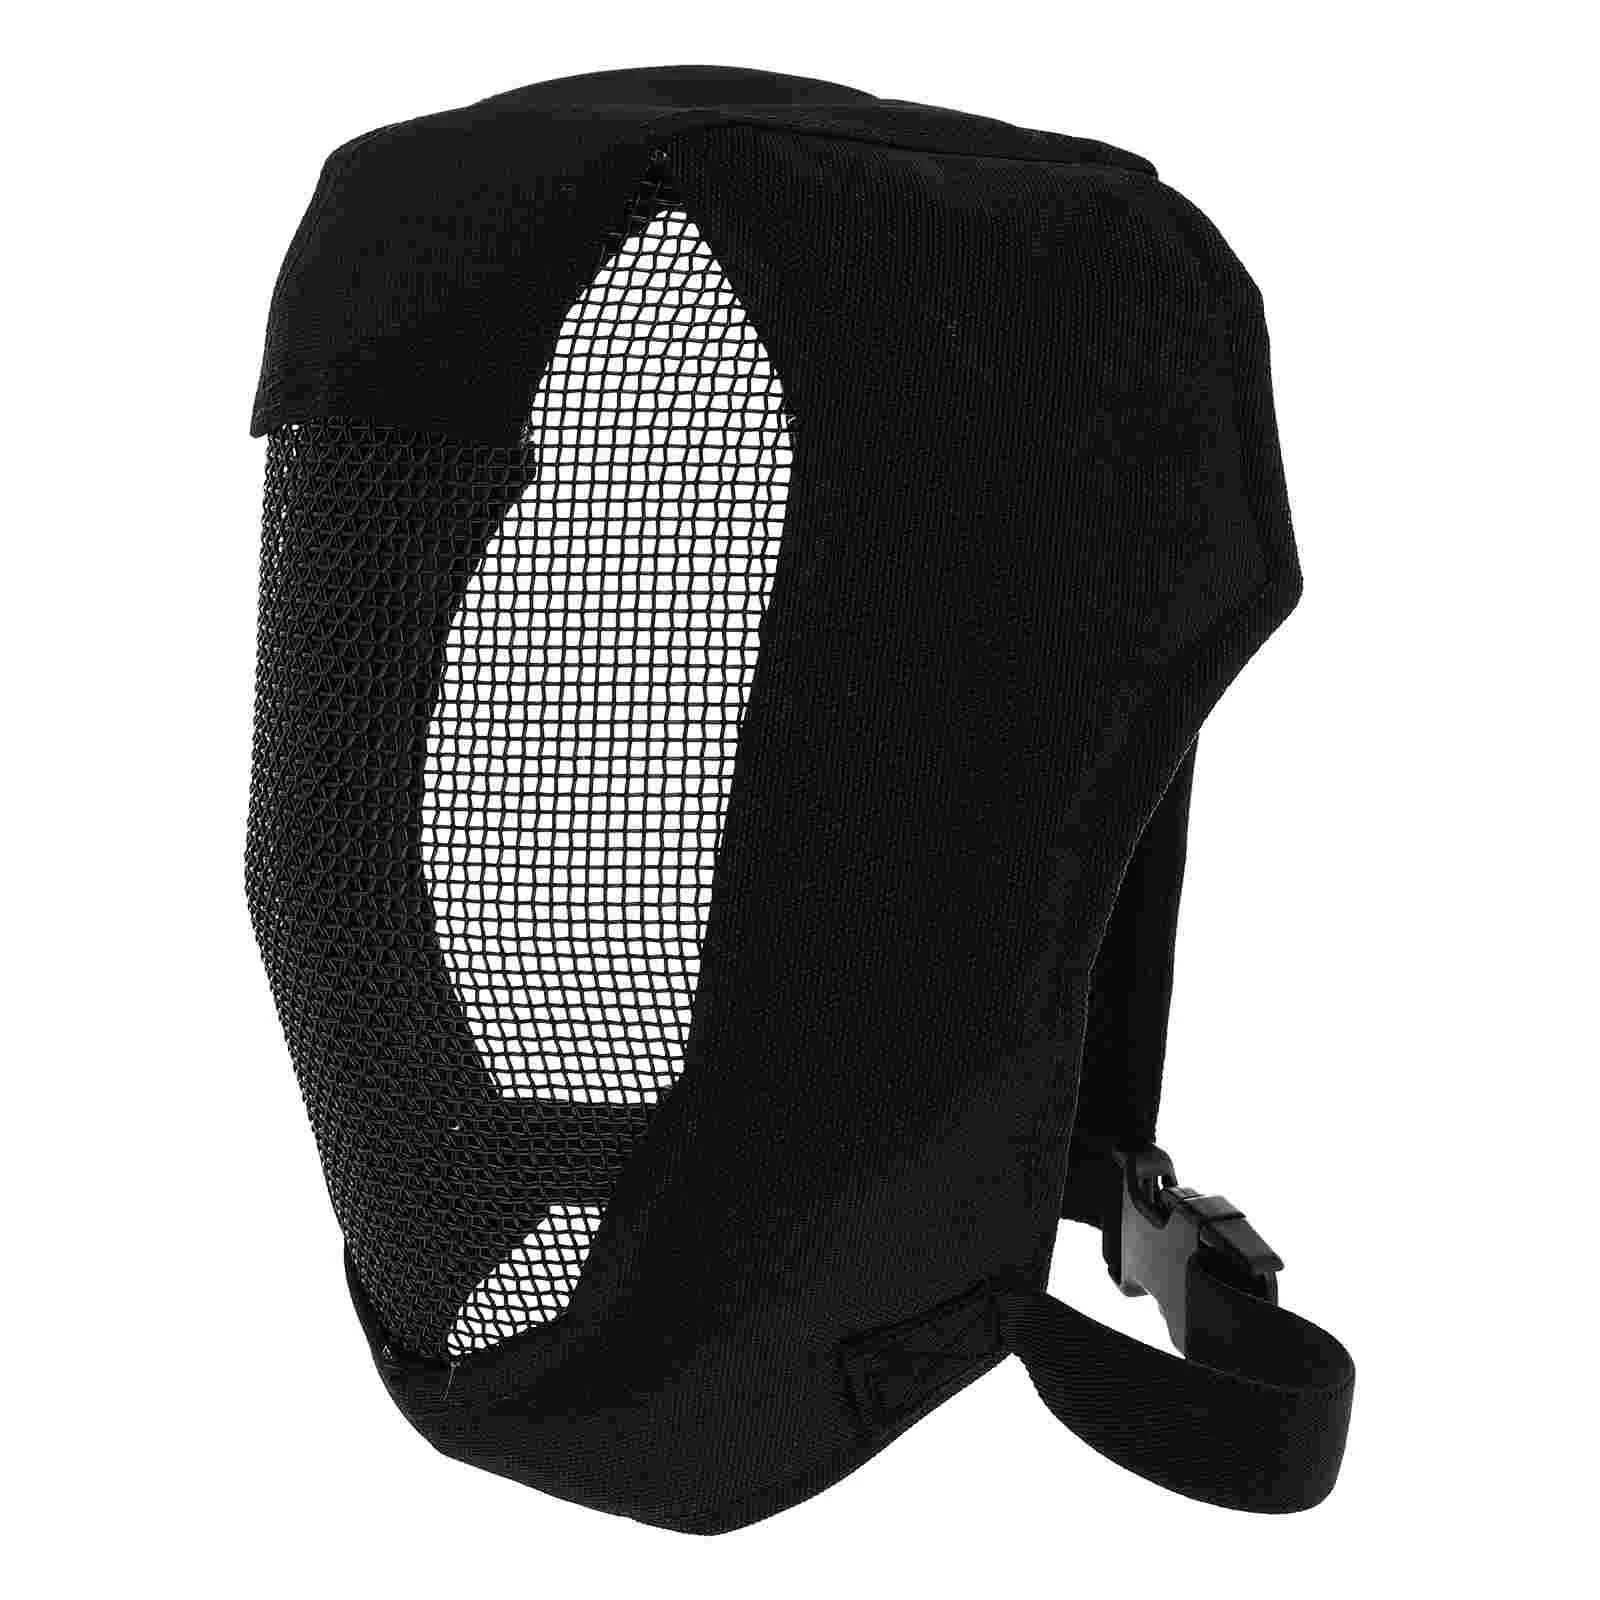 

Helmets for Adults Archery Guard Breathable Game Mask Face-shield Safety Protective Head Cover